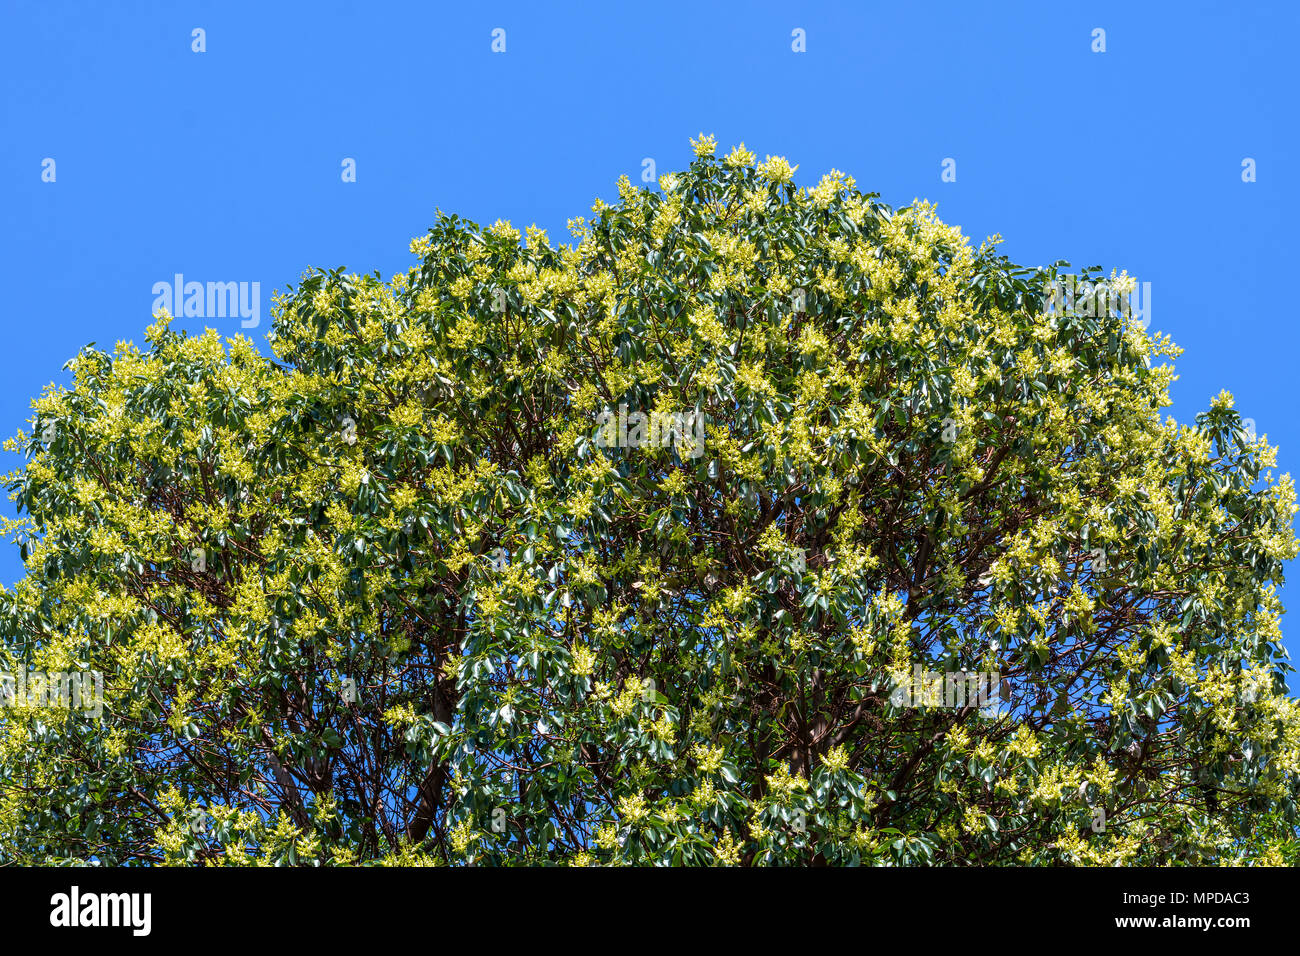 Arbutus tree in flower, Hornby Island, BC, Canada. Stock Photo